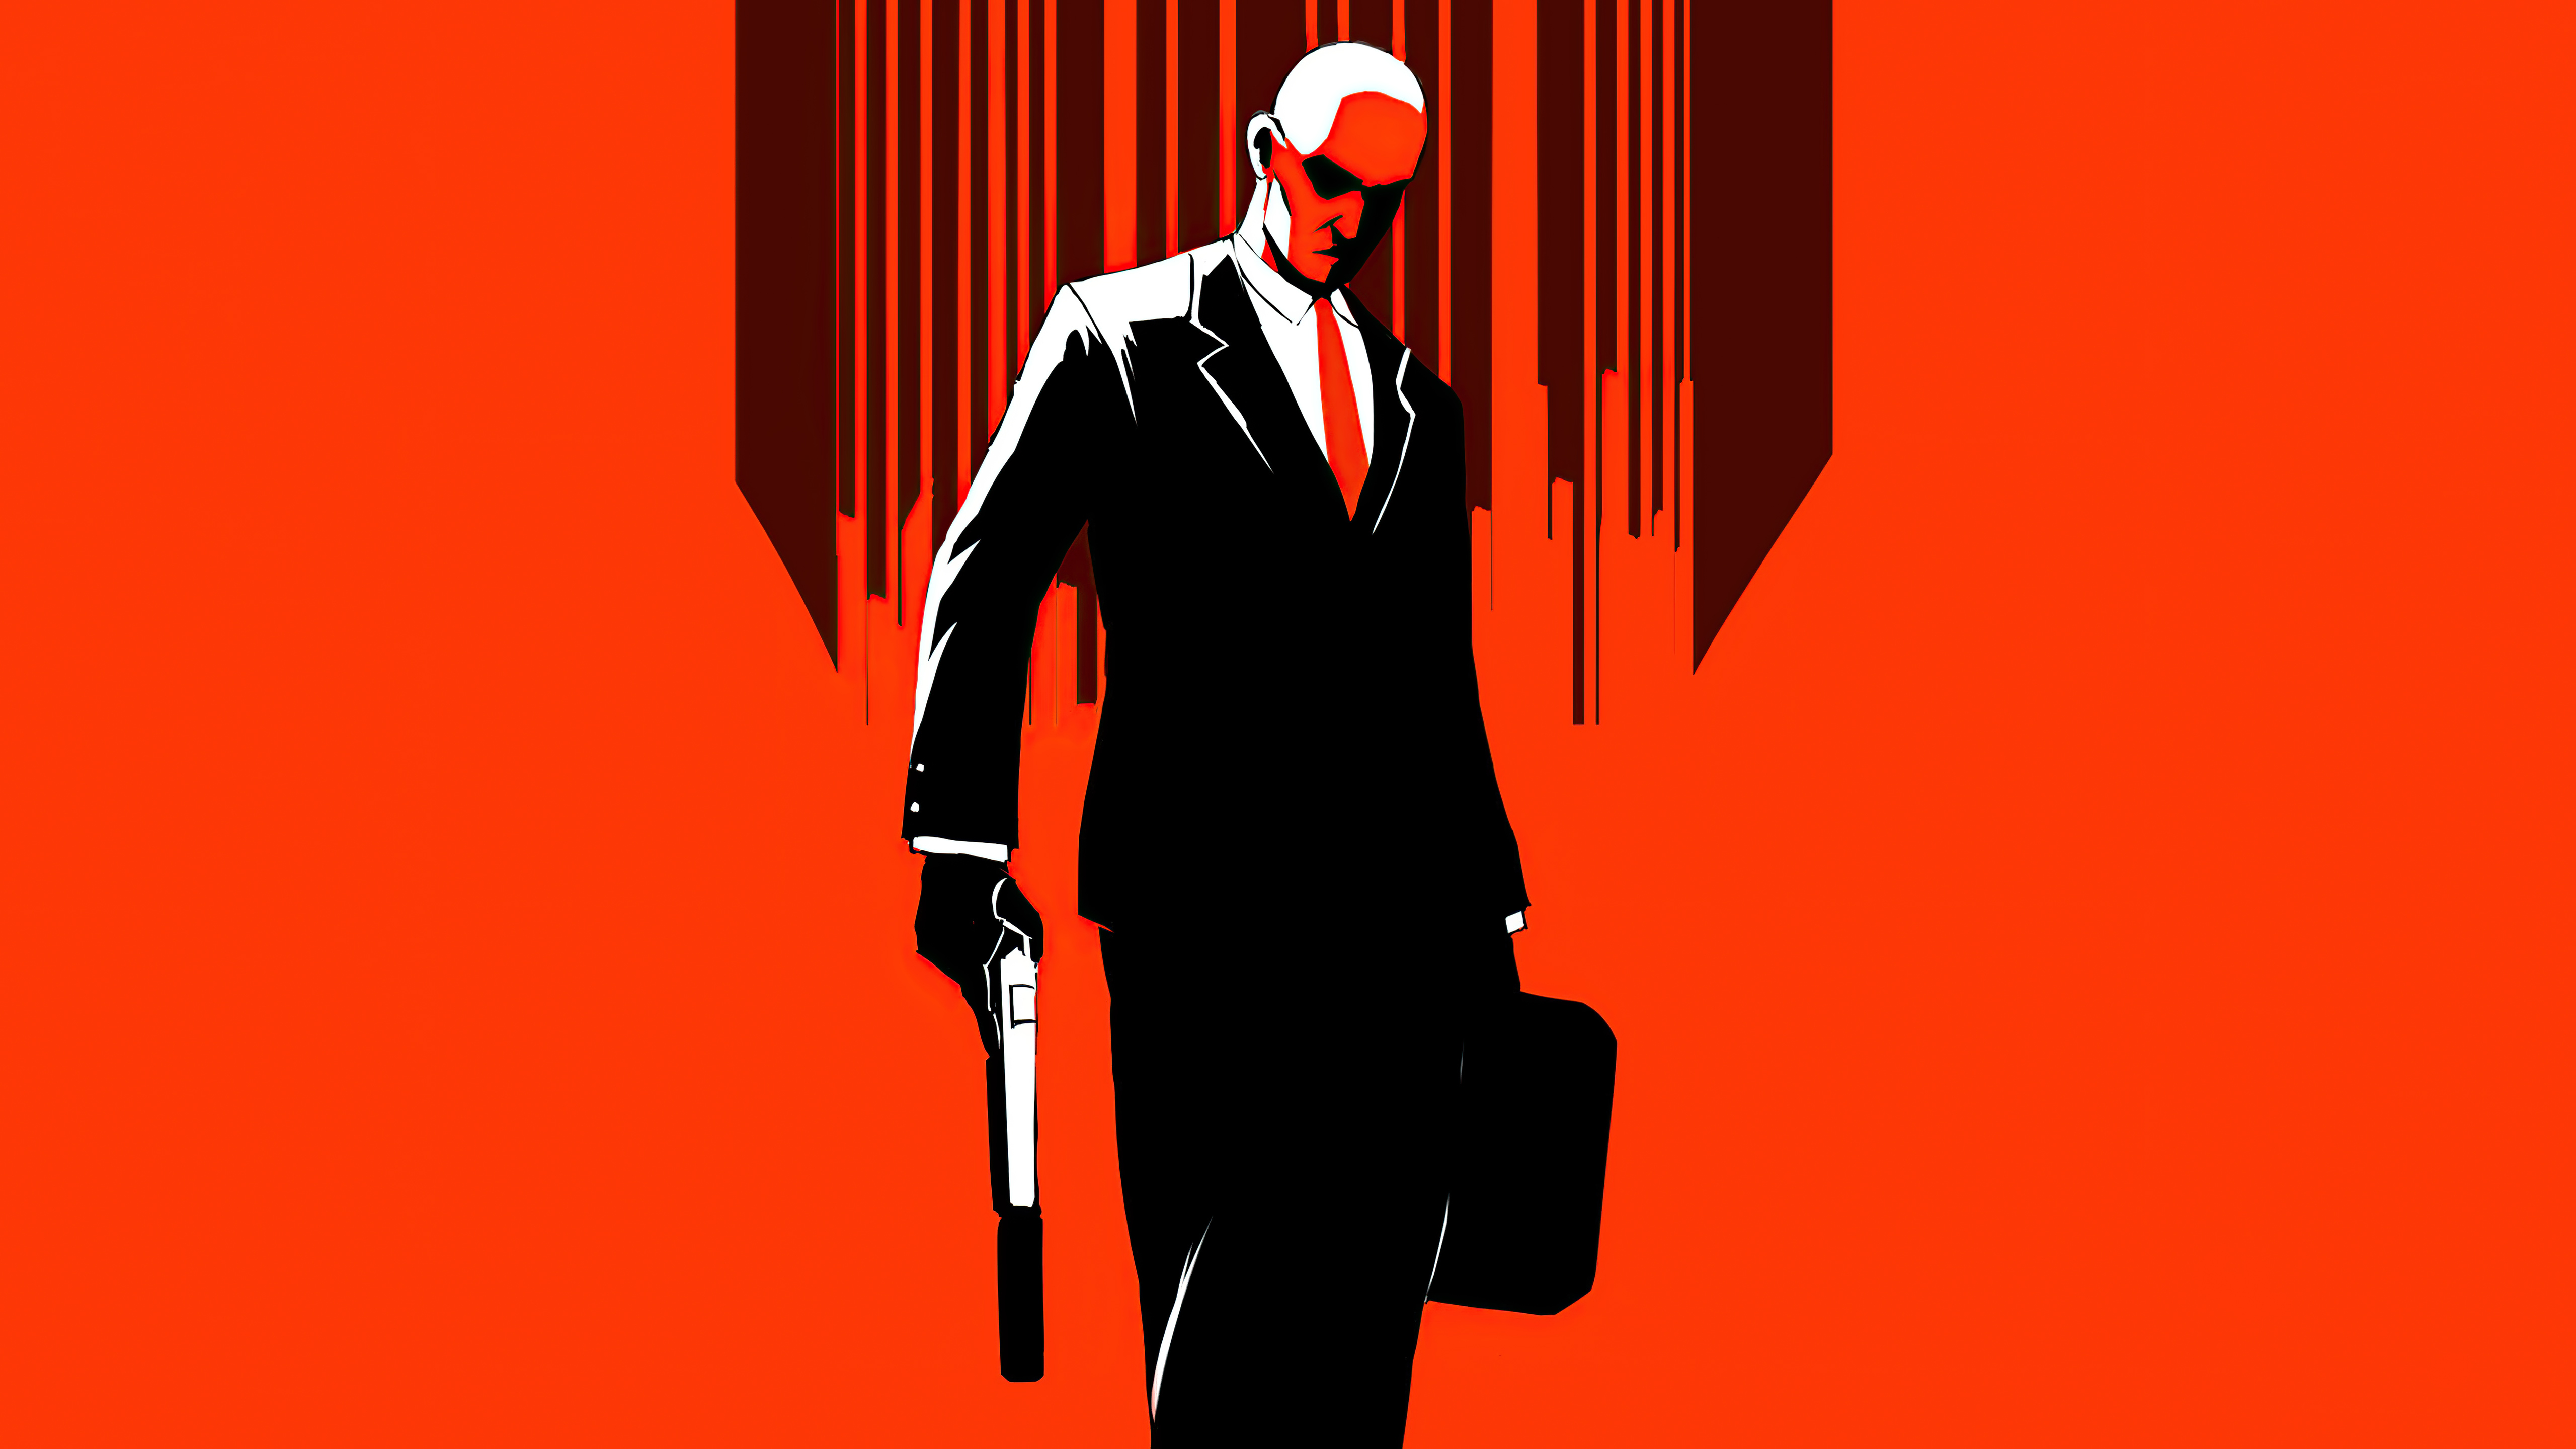 Top 999+ Hitman Absolution Wallpaper Full HD, 4K✓Free to Use